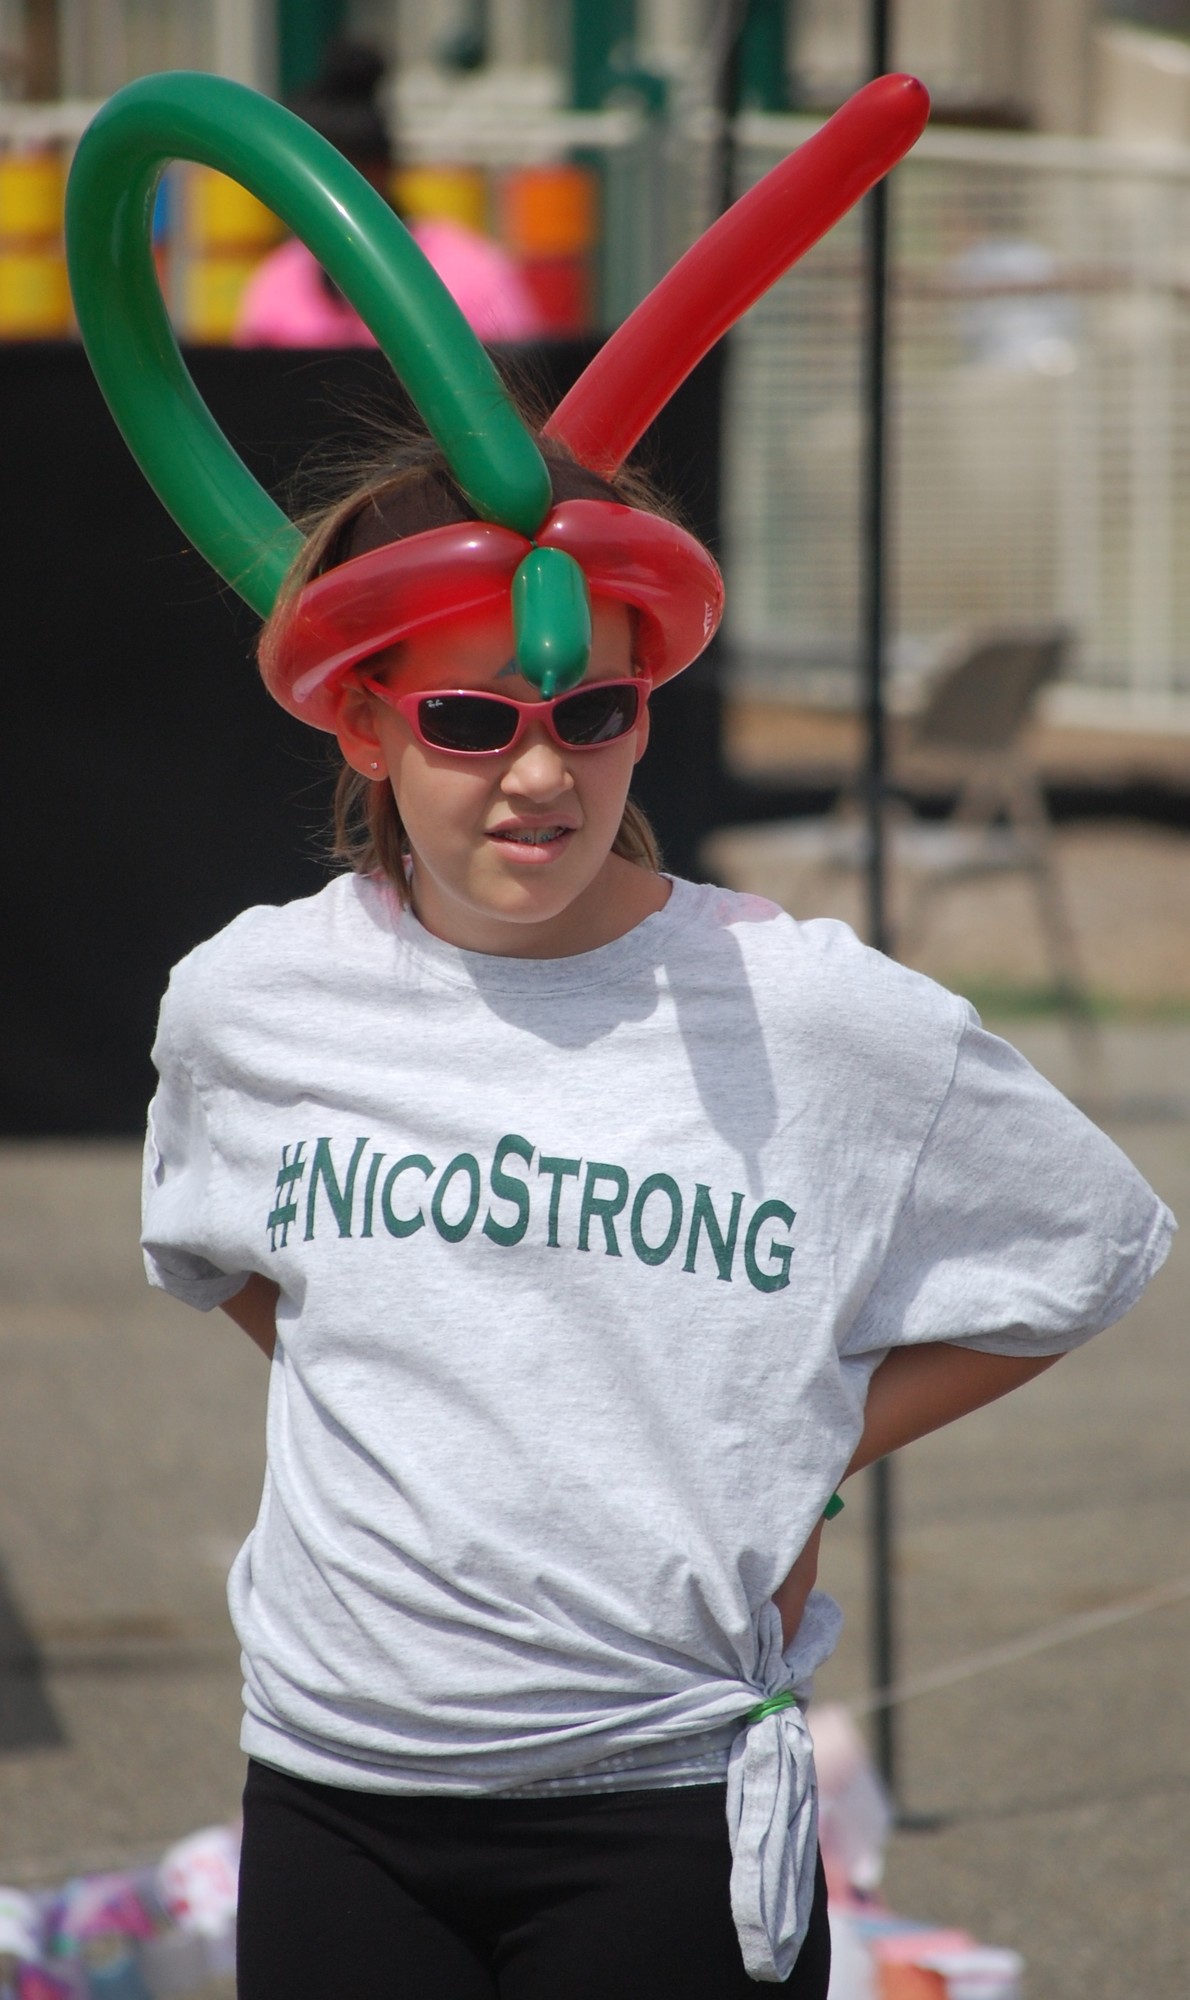 Molly Urban, 11, wore a shirt in support of her former counselor at the Seaford Recreation program.